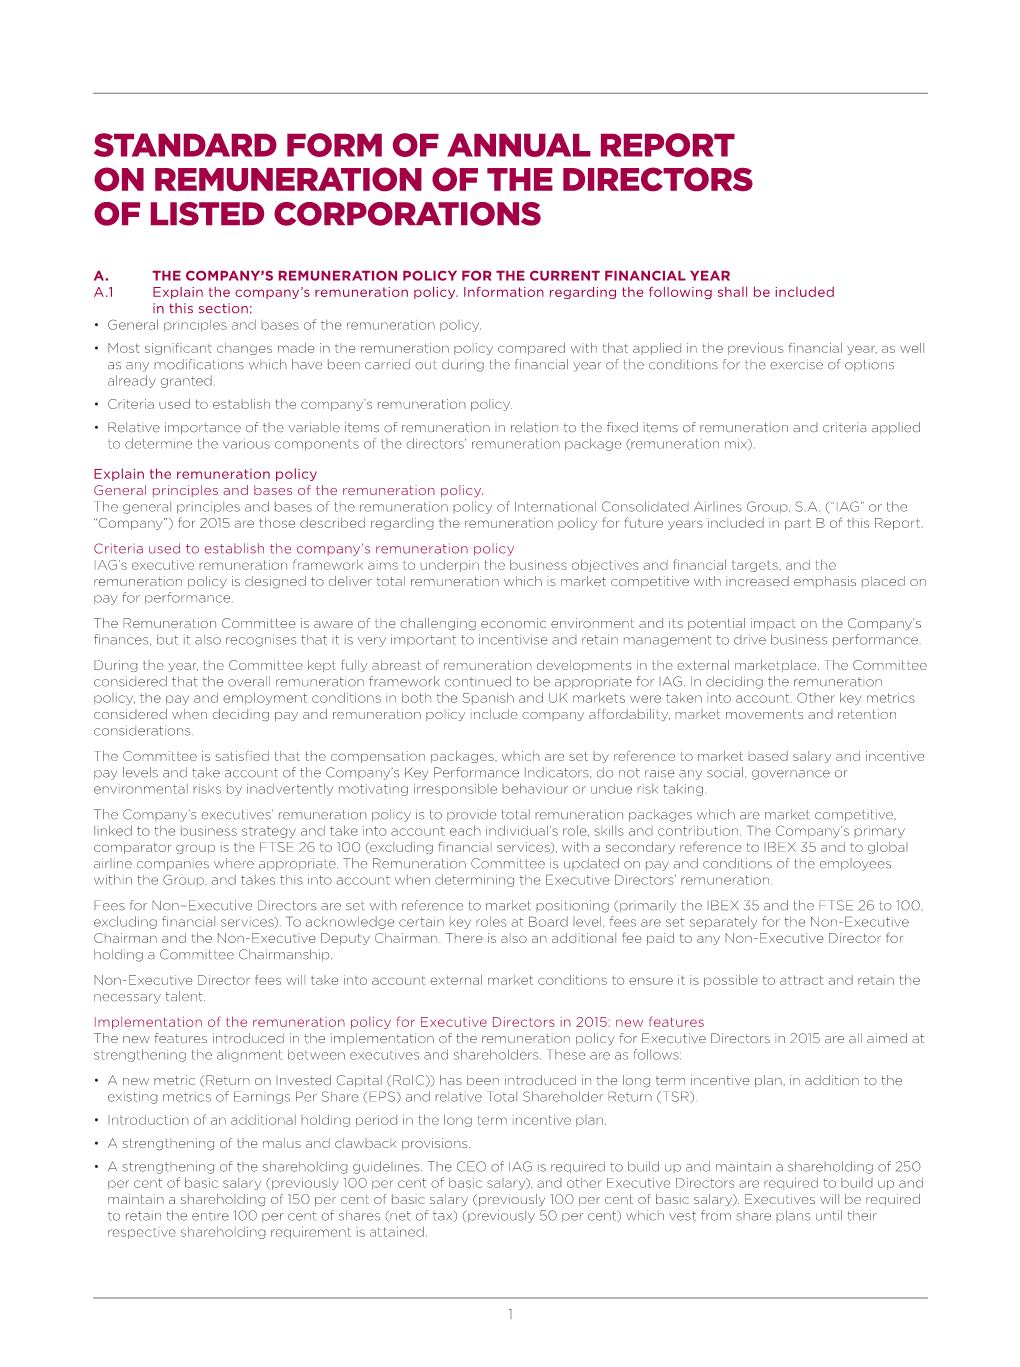 Standard Form of Annual Report on Remuneration of the Directors of Listed Corporations